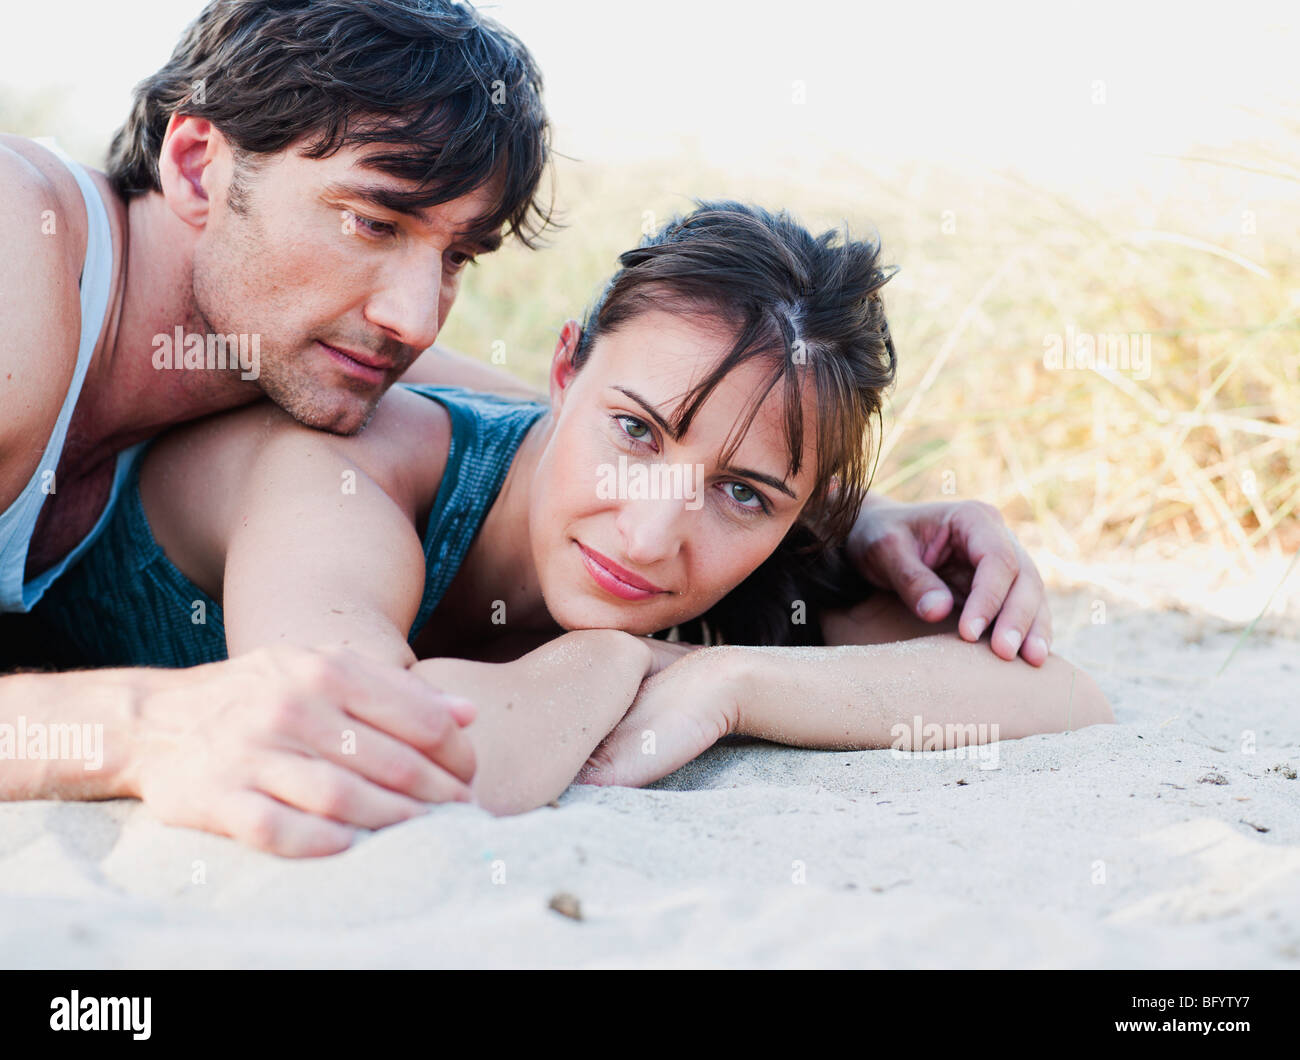 Couple lying in sand smiling Banque D'Images